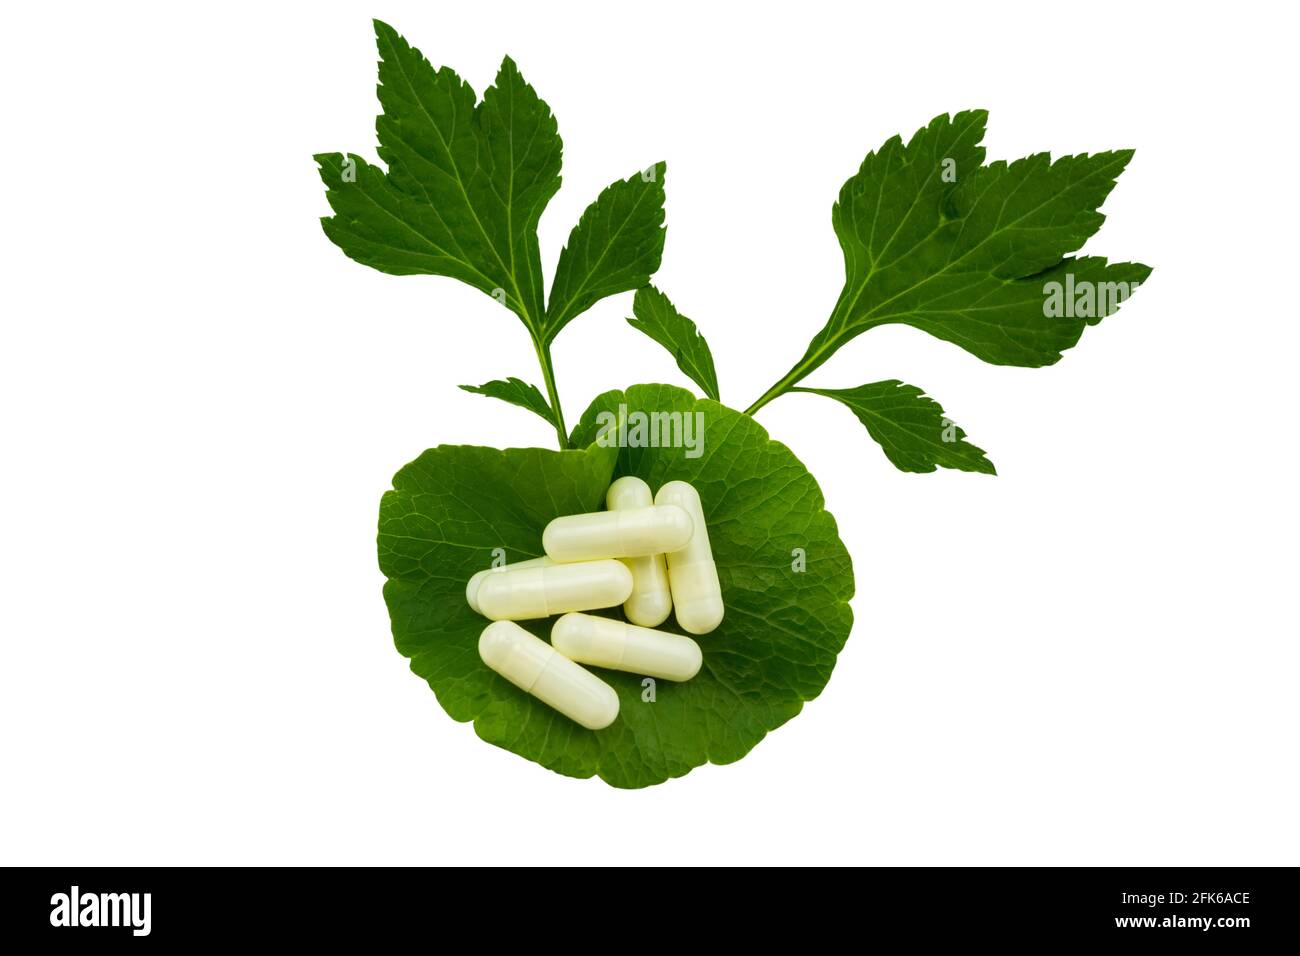 Colorful of pill and green leaf of White mugwort plant (Artemisia lactiflora) with Green Asiatic Pennywort (Centella asiatica ) isolated on white back Stock Photo